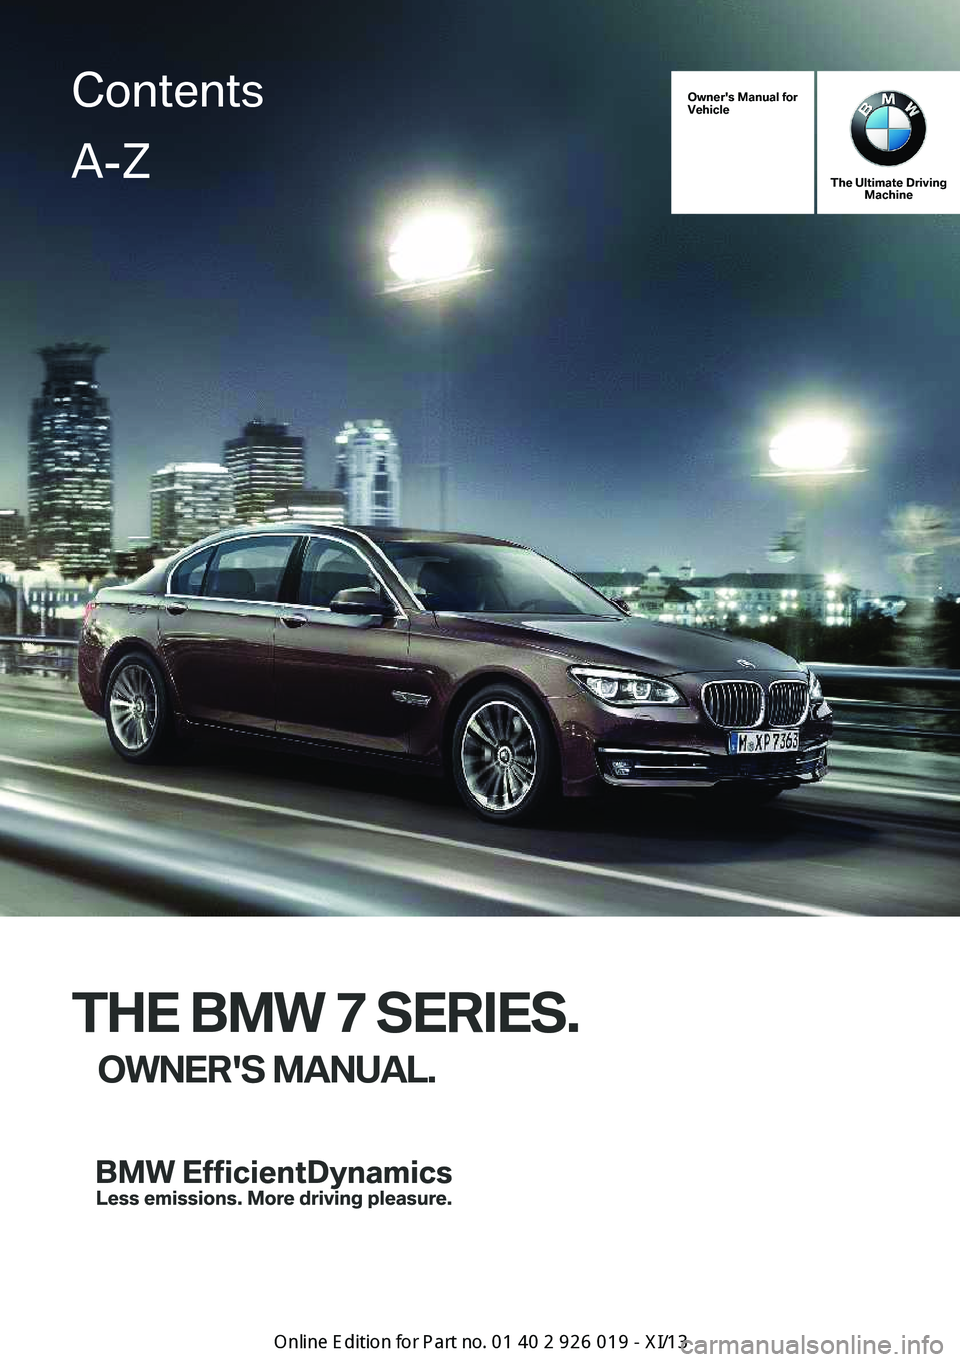 BMW 7 SERIES 2013 F01 Owners Manual Owner's Manual for
Vehicle
The Ultimate Driving Machine
THE BMW 7 SERIES.
OWNER'S MANUAL.
ContentsA-Z
Online Edition for Part no. 01 40 2 909 749 - VI/13   